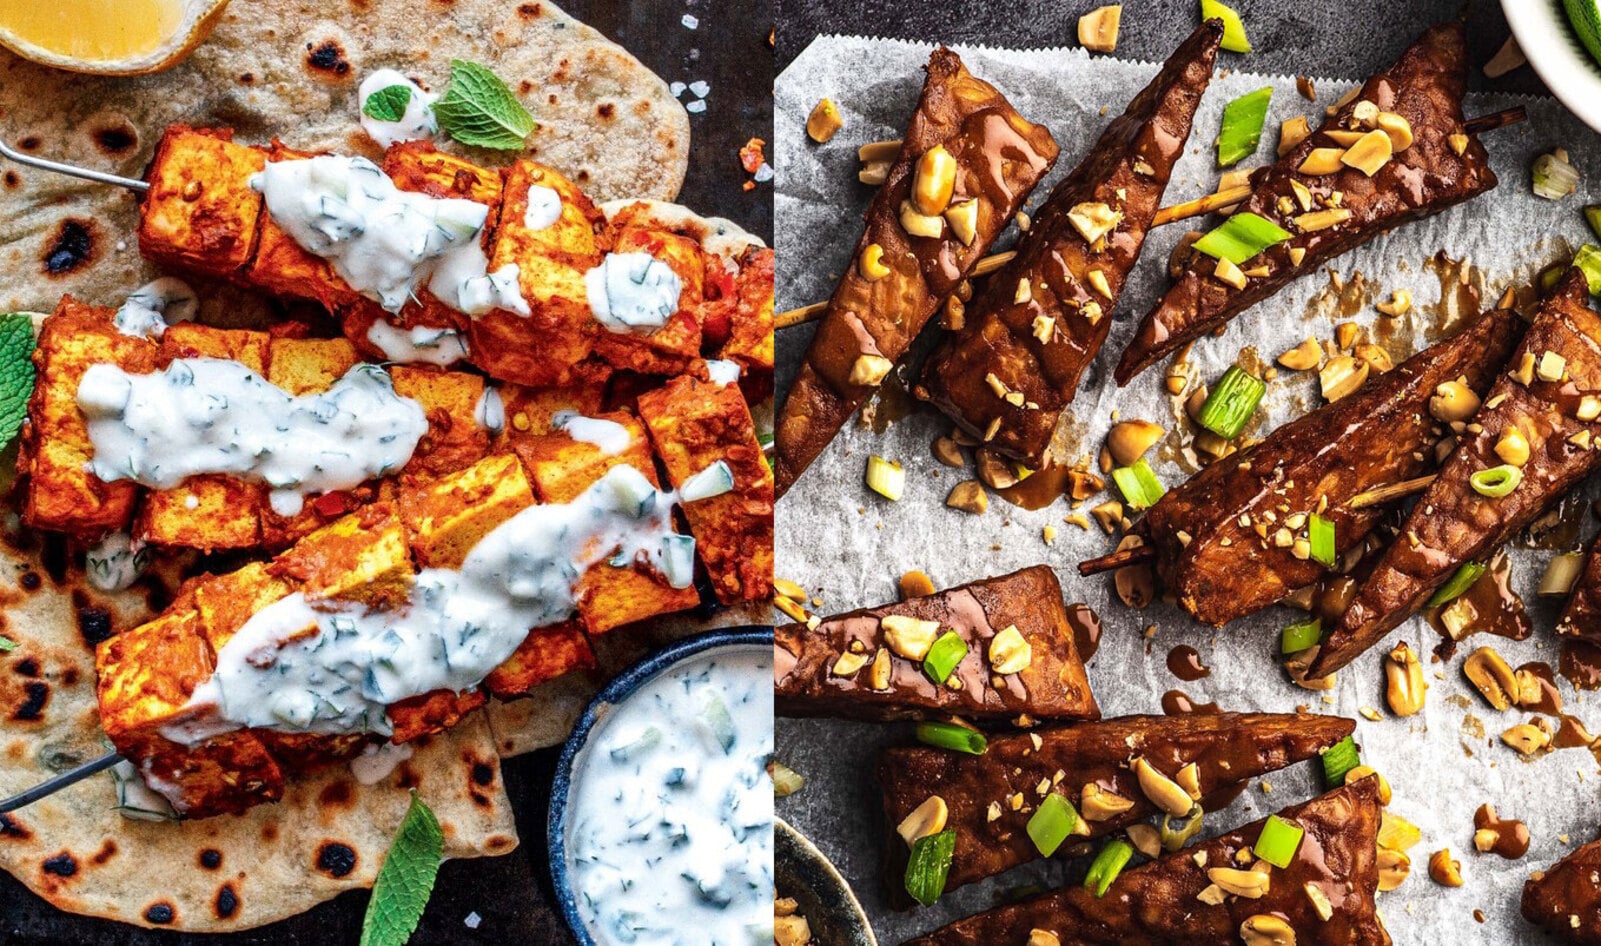 Tofu vs. Tempeh: What's the Difference? And Which Is Better for You?